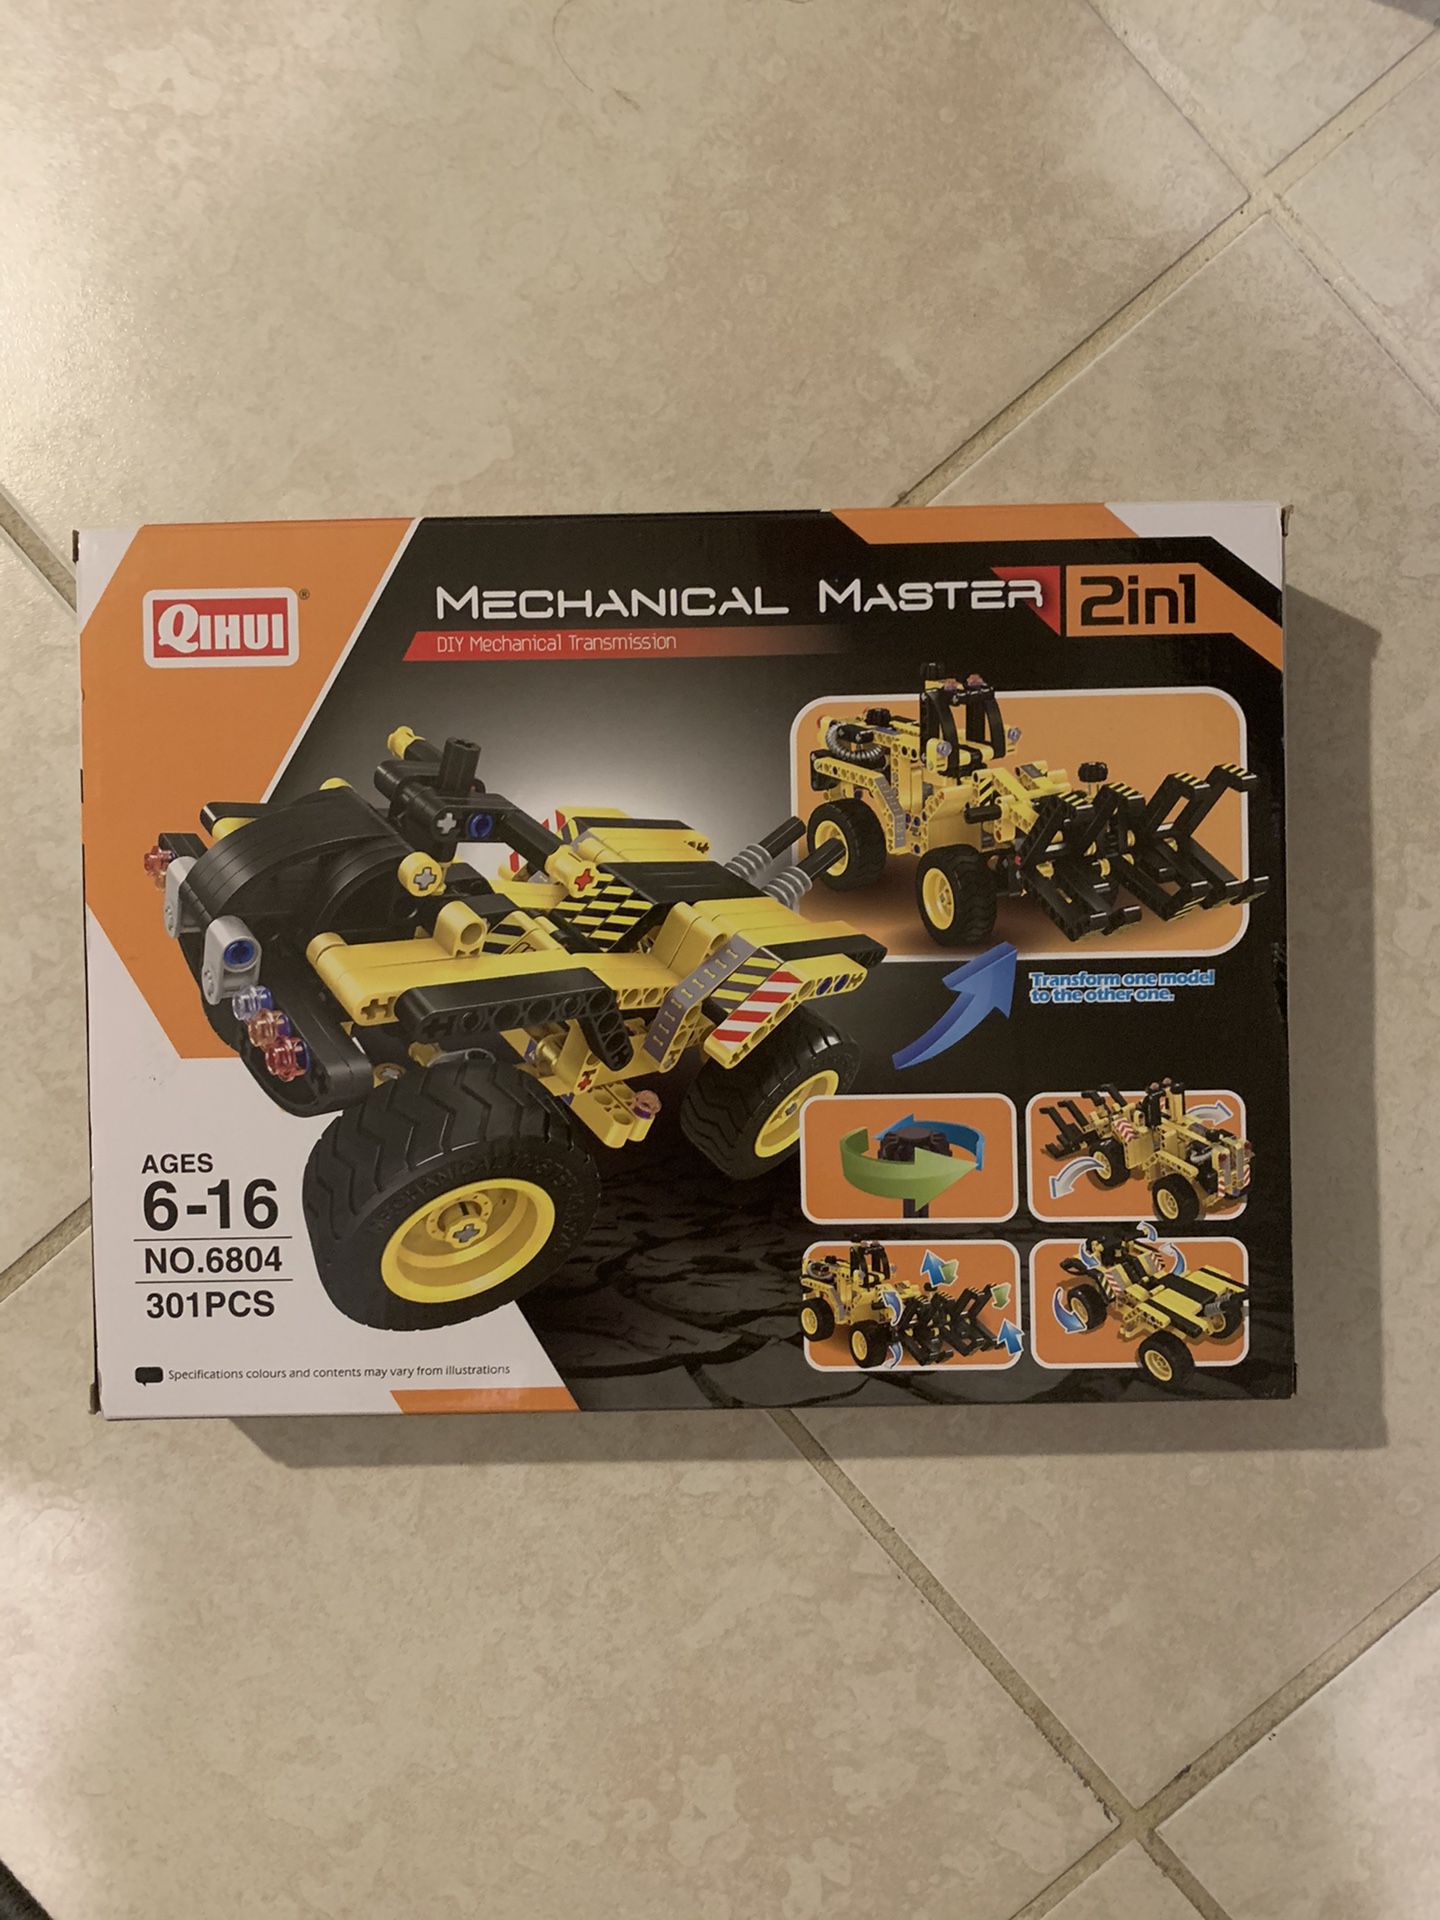 Mechanical master toy